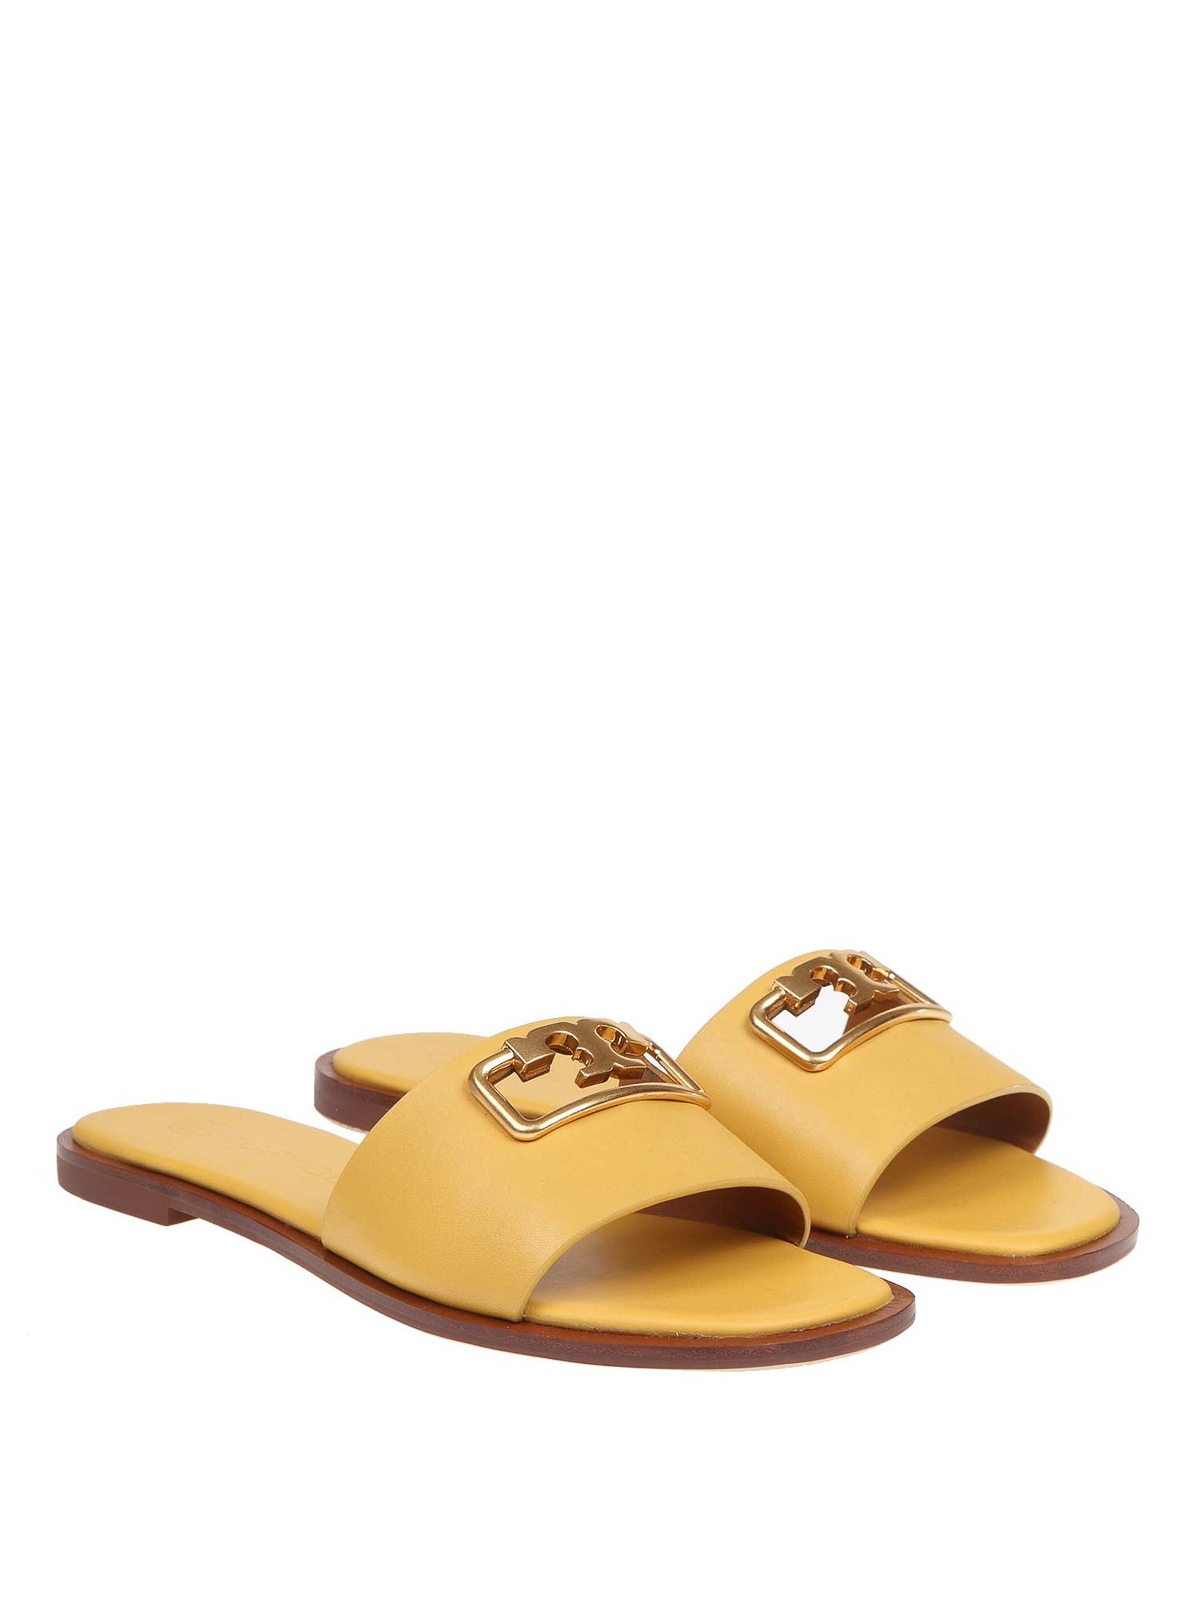 tory burch selby slide